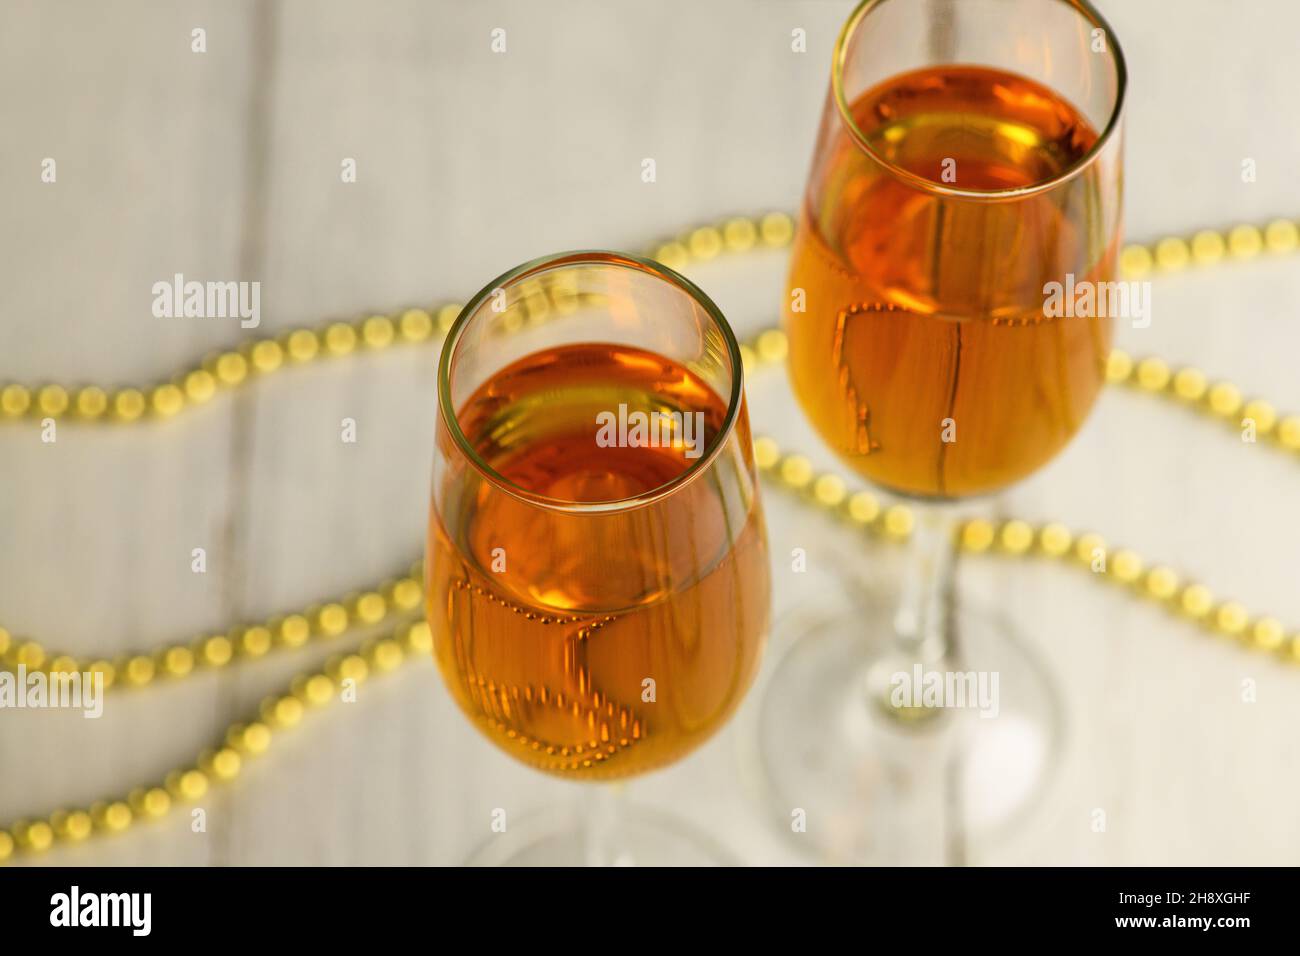 Two glasses of champagne, wine on a light background with gold beads. Alcoholic drink: champagne, beer, white wine. New year and Christmas background. Stock Photo